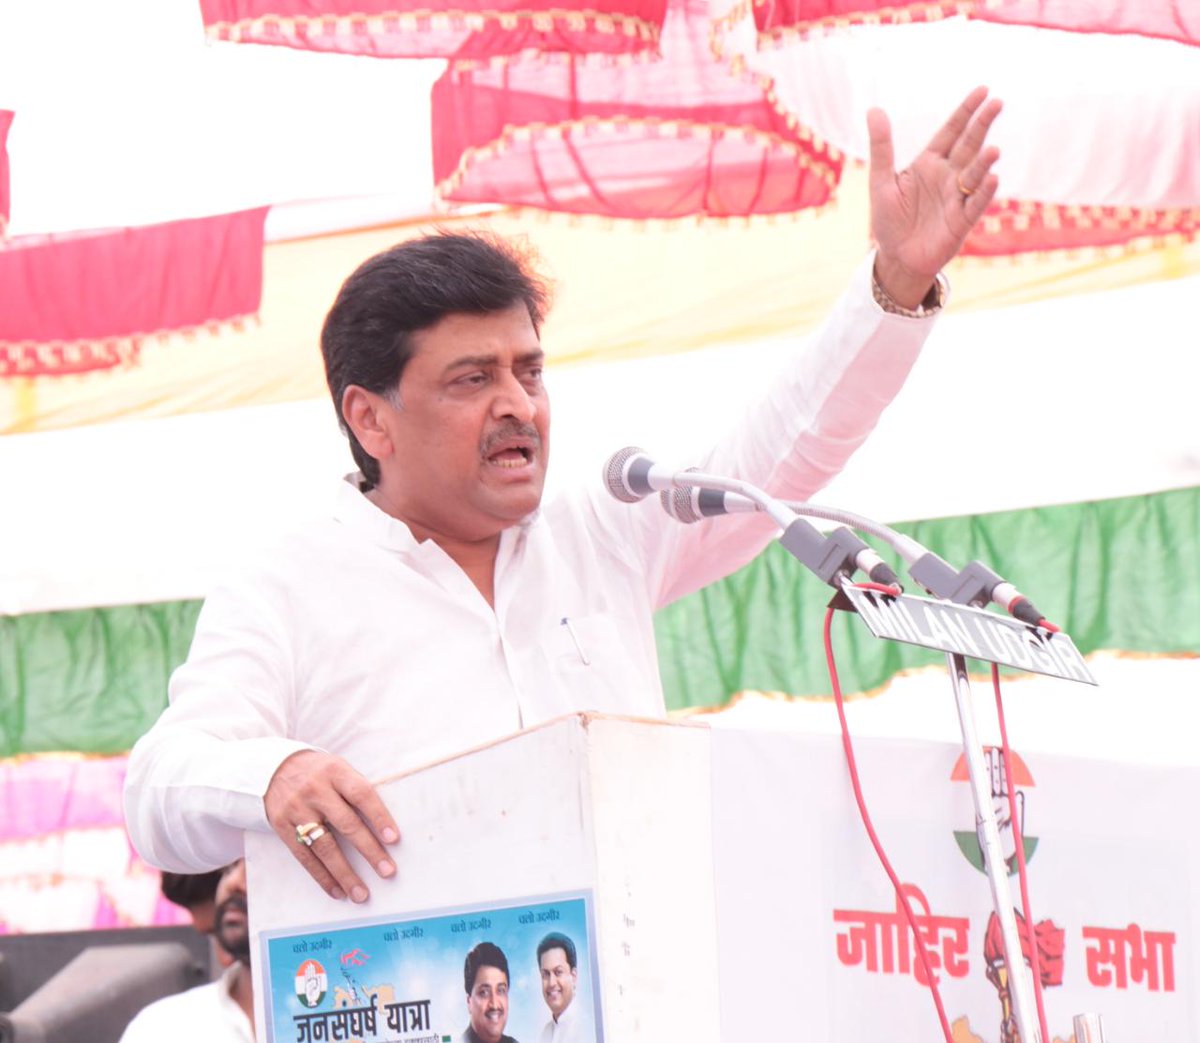 BJP is a cancer country has developed, root out in 2019 general polls: Ashok Chavan